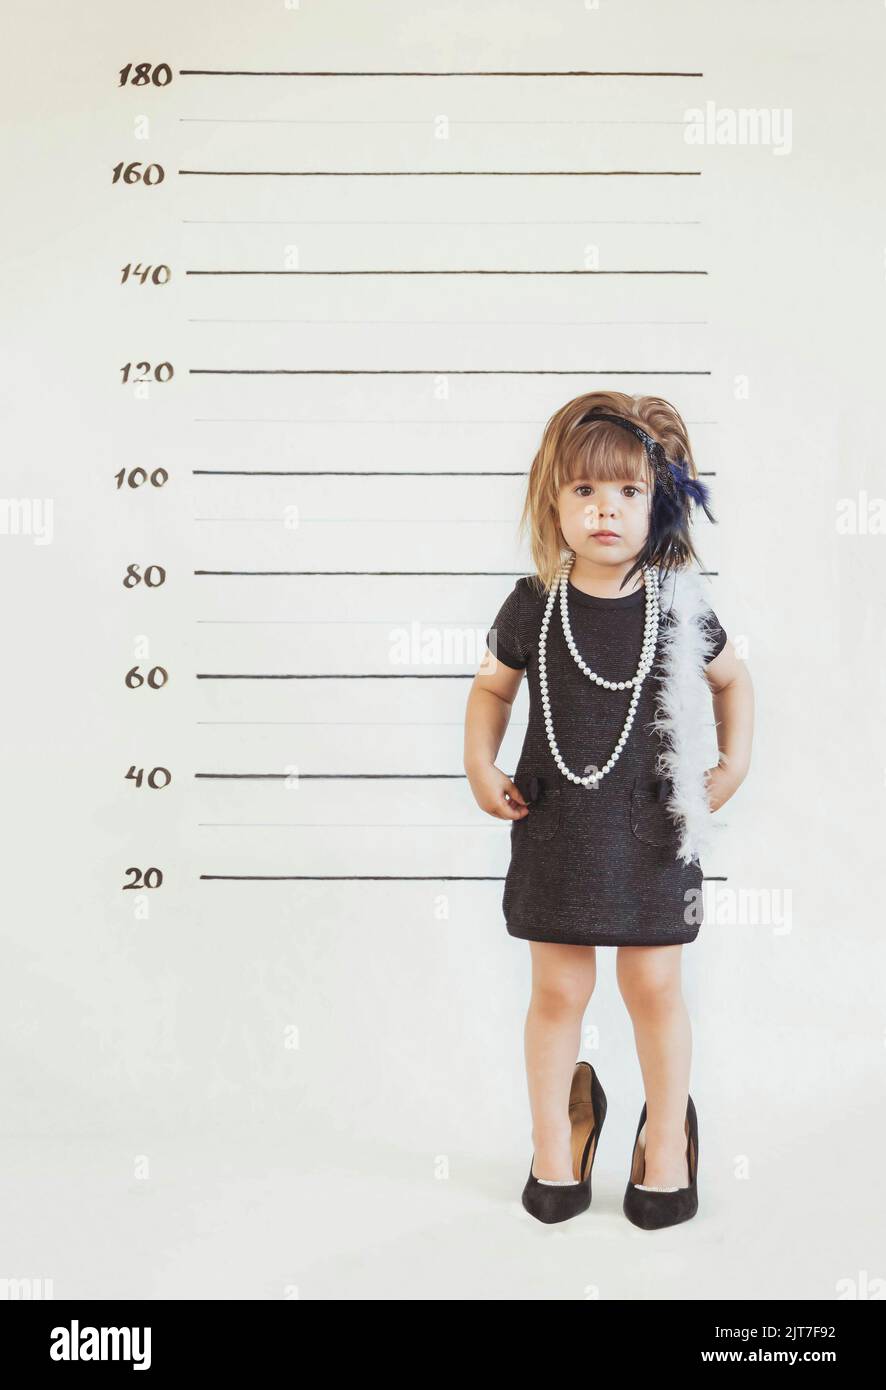 https://c8.alamy.com/comp/2JT7F92/charming-baby-in-gangster-costume-at-the-police-station-2JT7F92.jpg